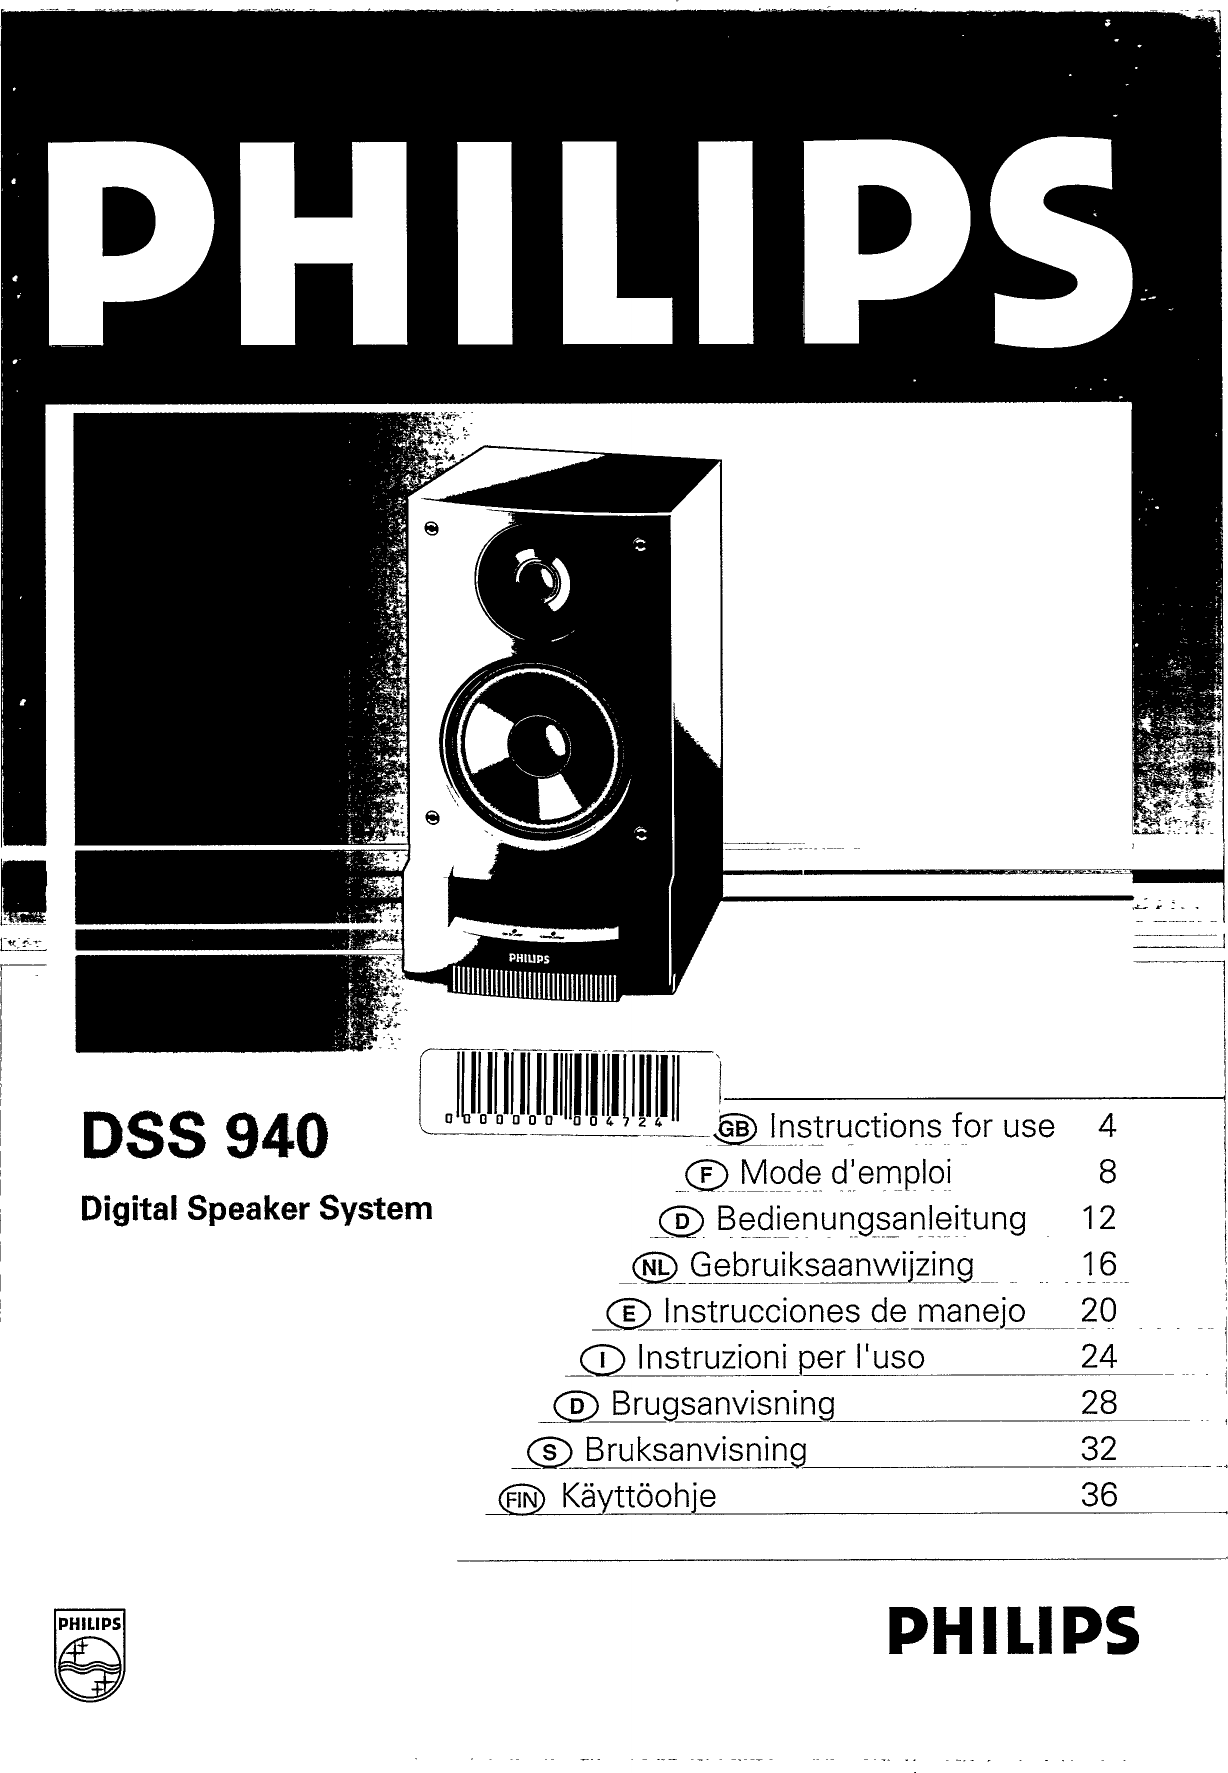 Page 1 of 8 - Philips  DSS940 Dfu Ita